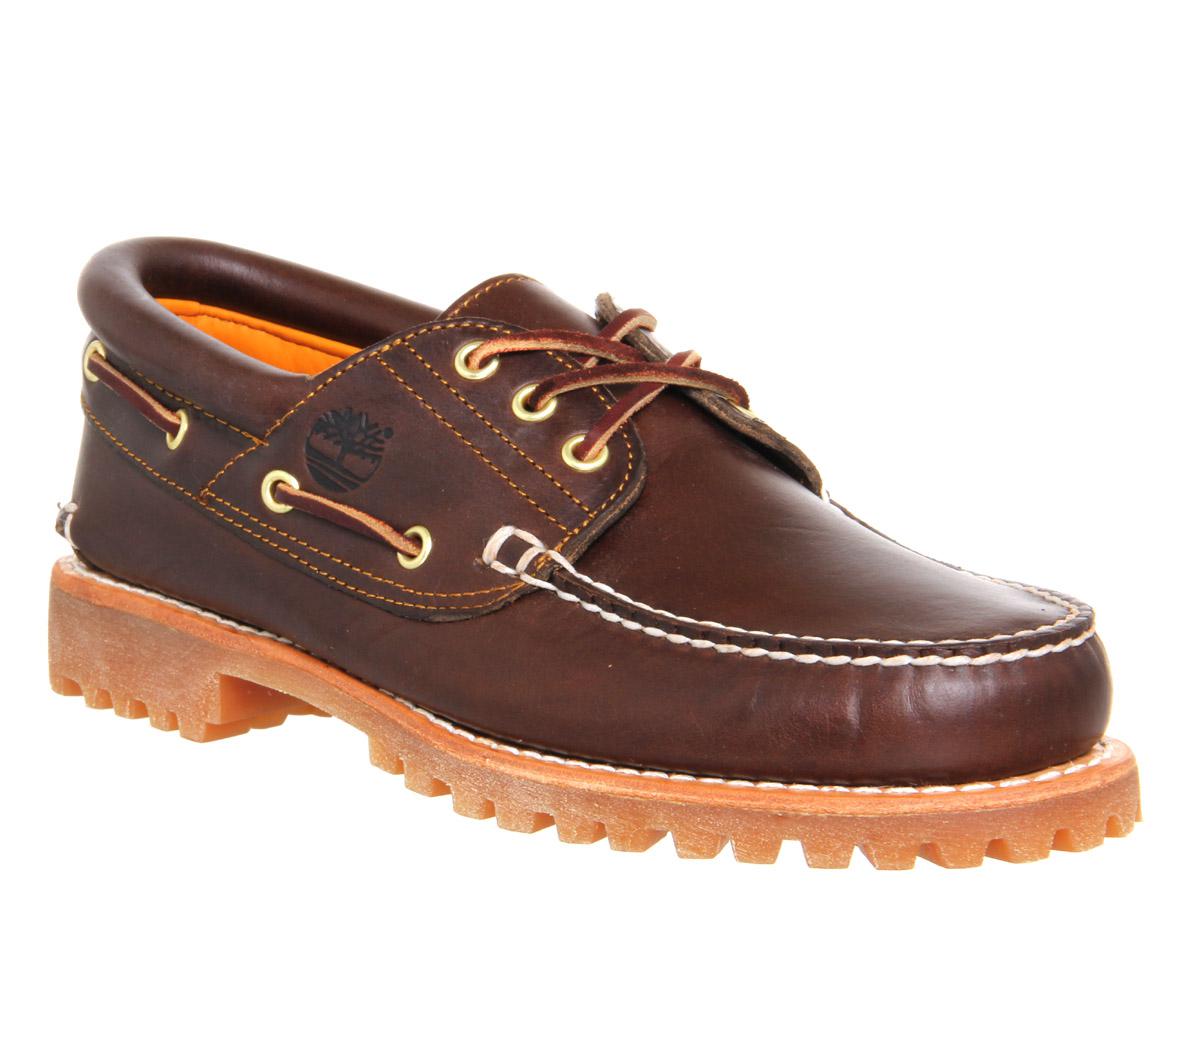 Timberland Cleated Boat Shoe in Burgundy (Brown) for Men - Lyst